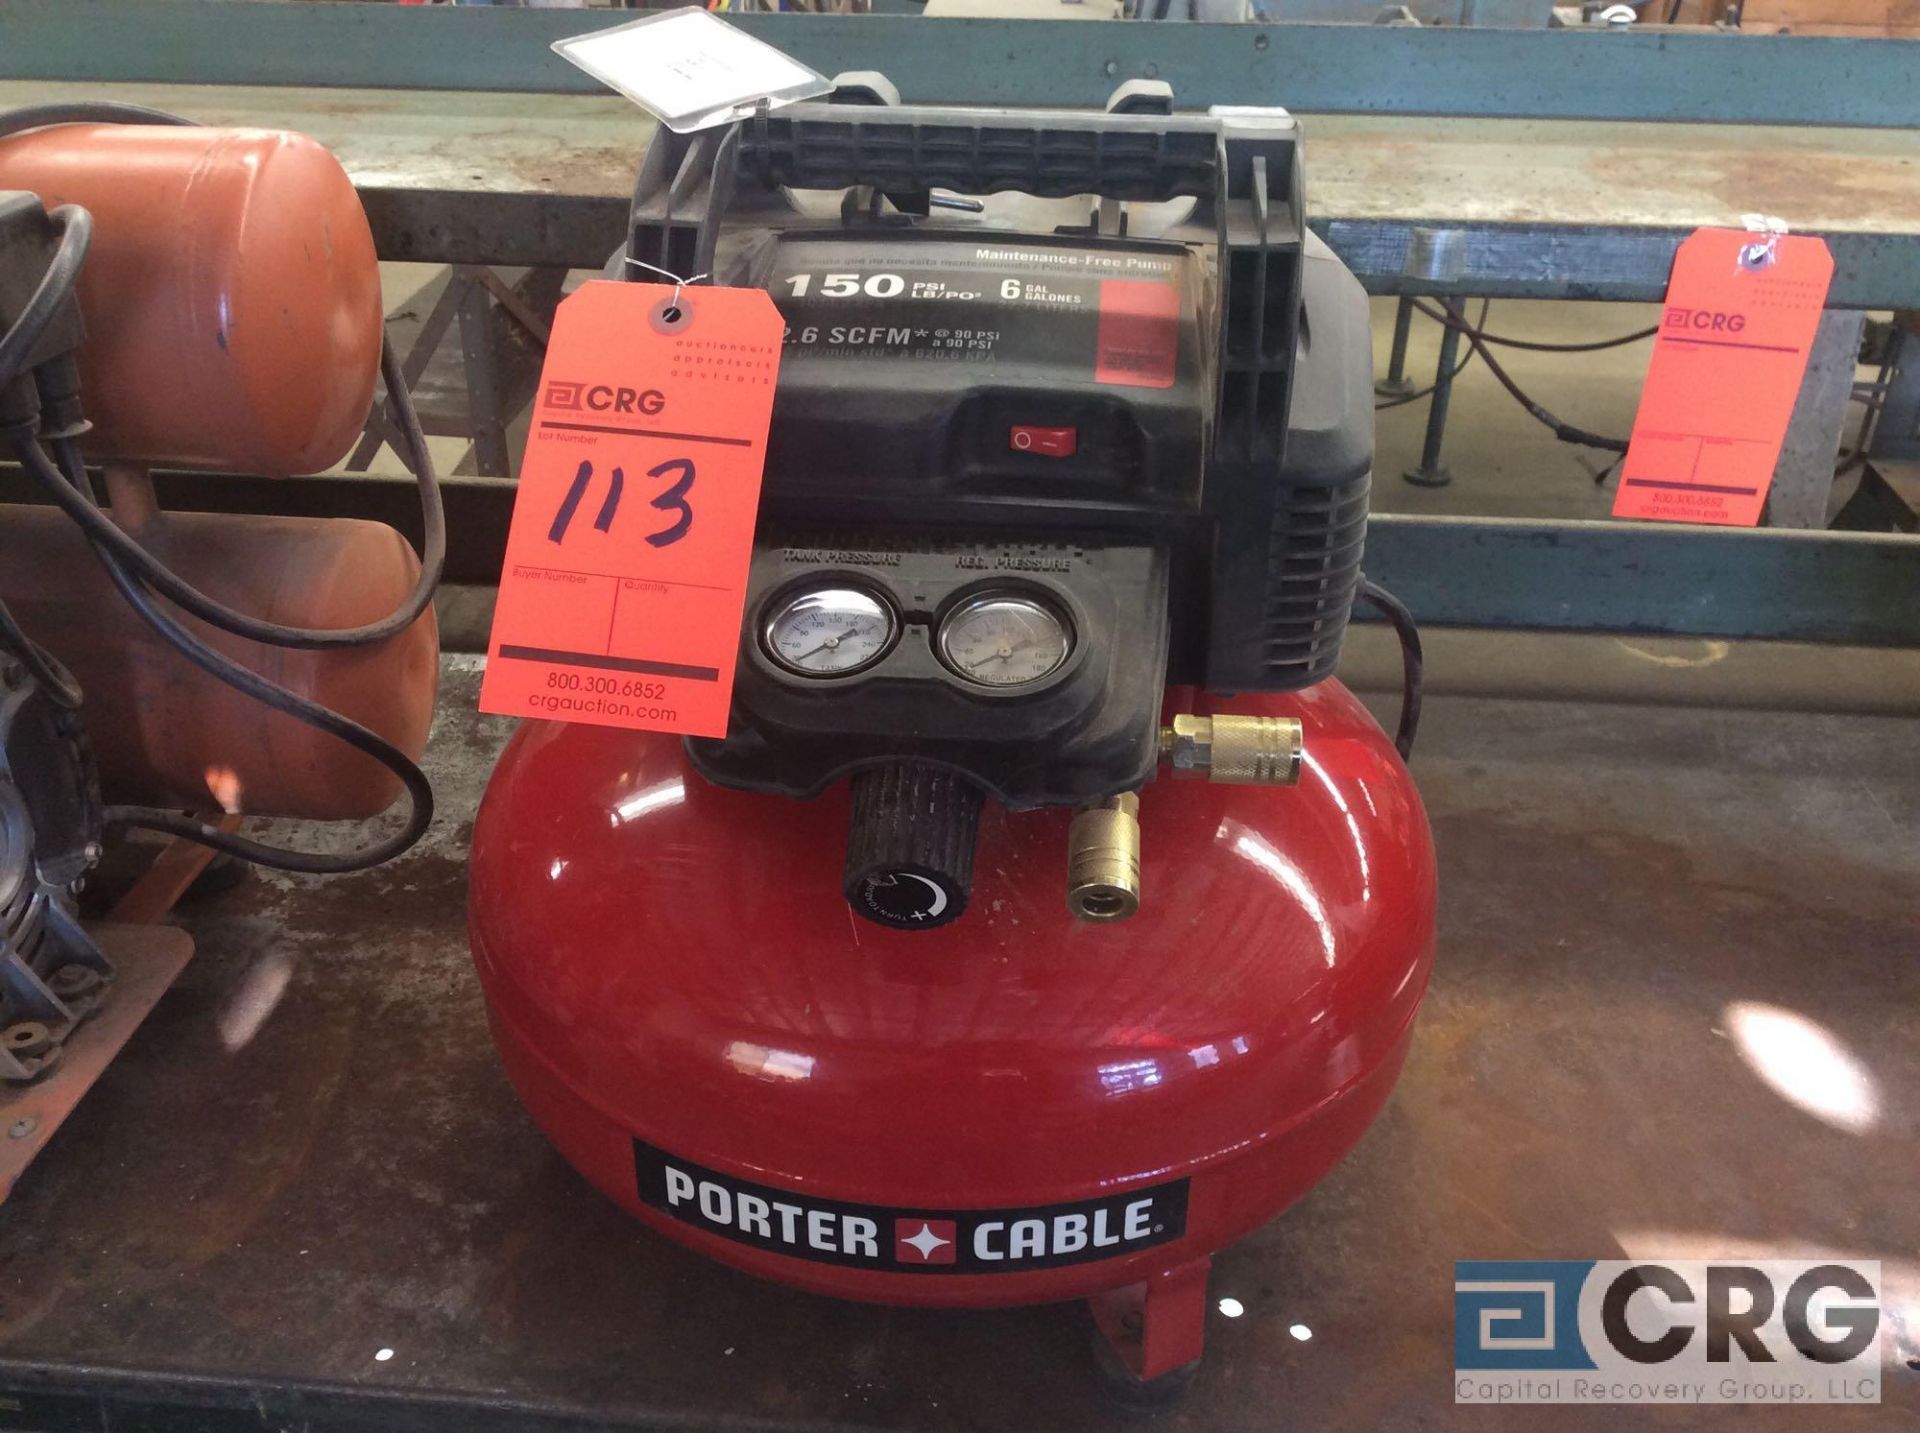 Porter and Cable pancake air compressor, mn C2002, 1 phase